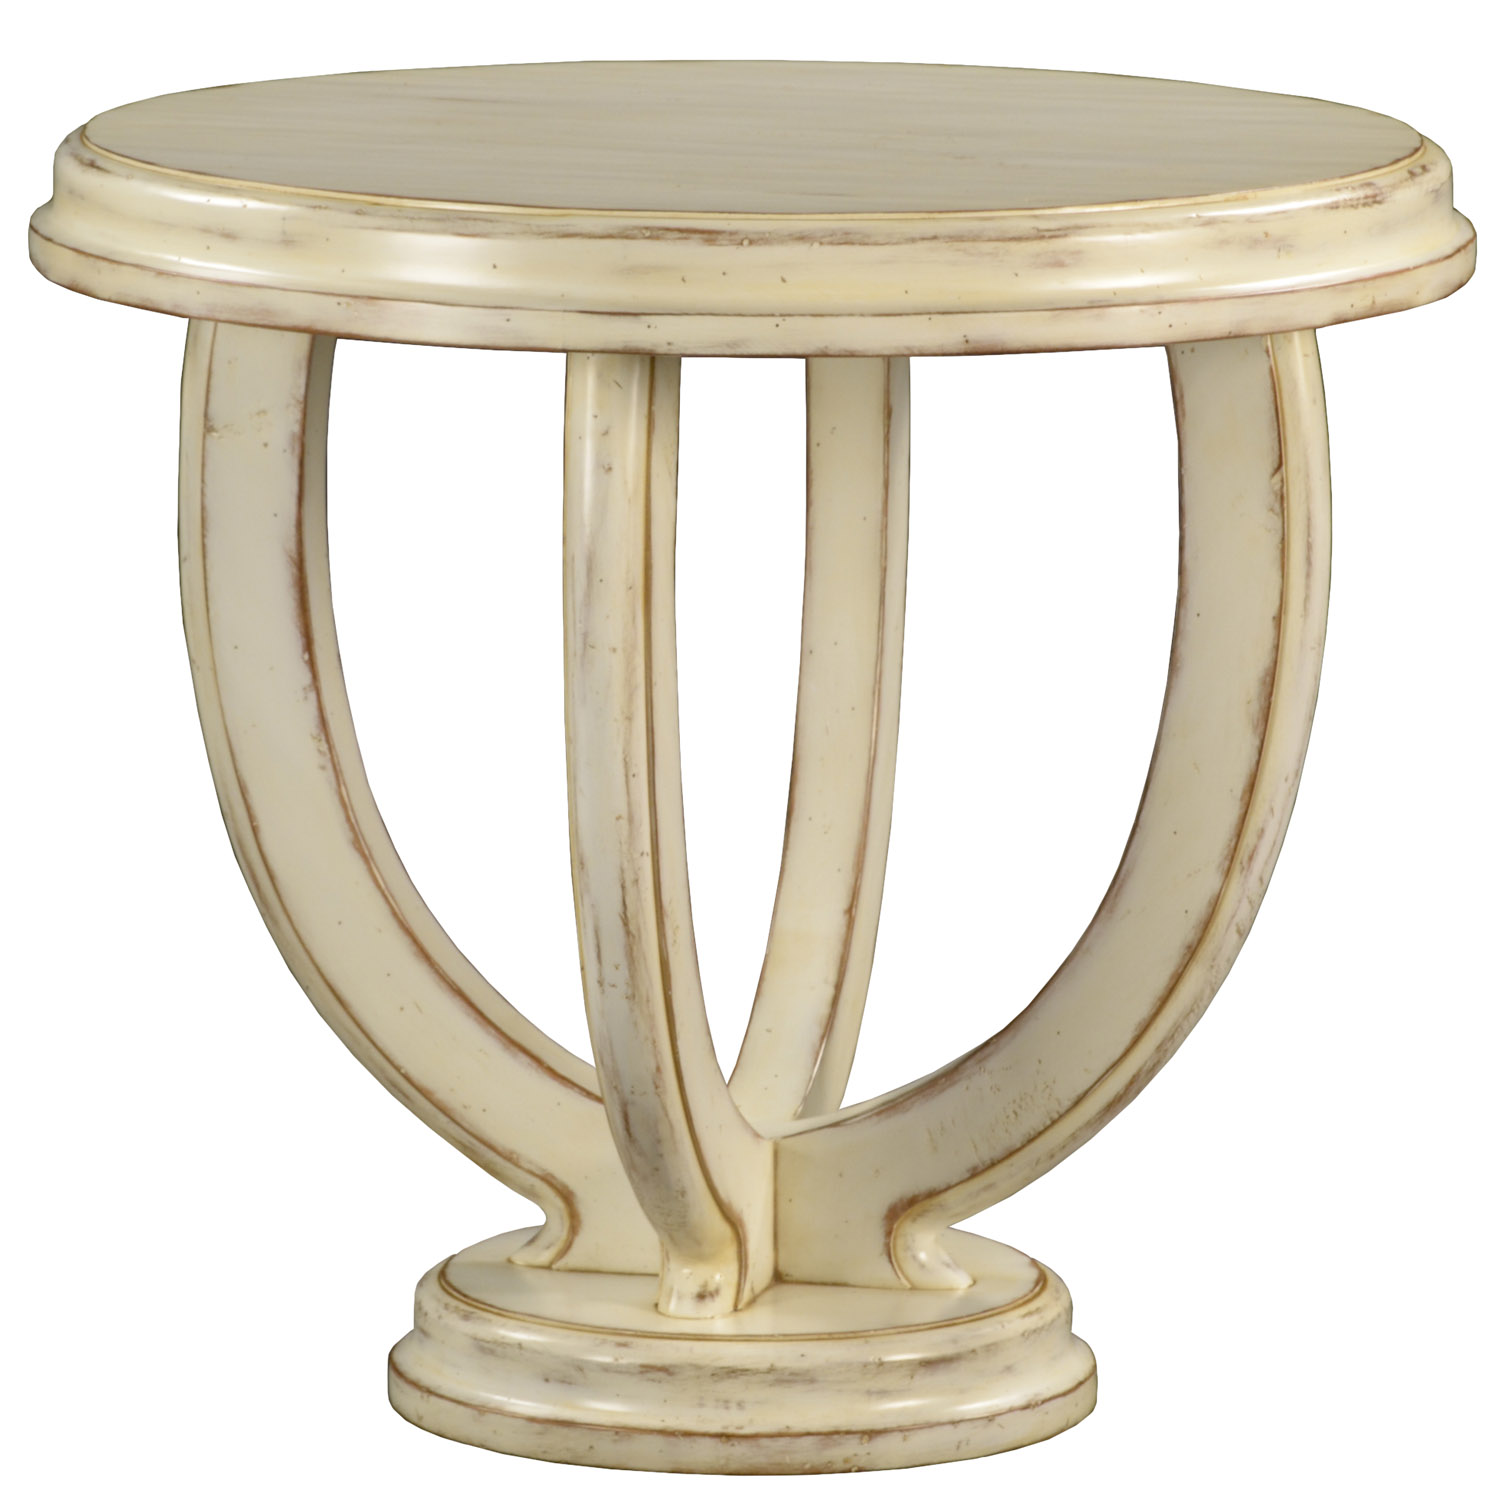 Marcel traditional painted and distressed round side table by Woodland furniture in Idaho Falls